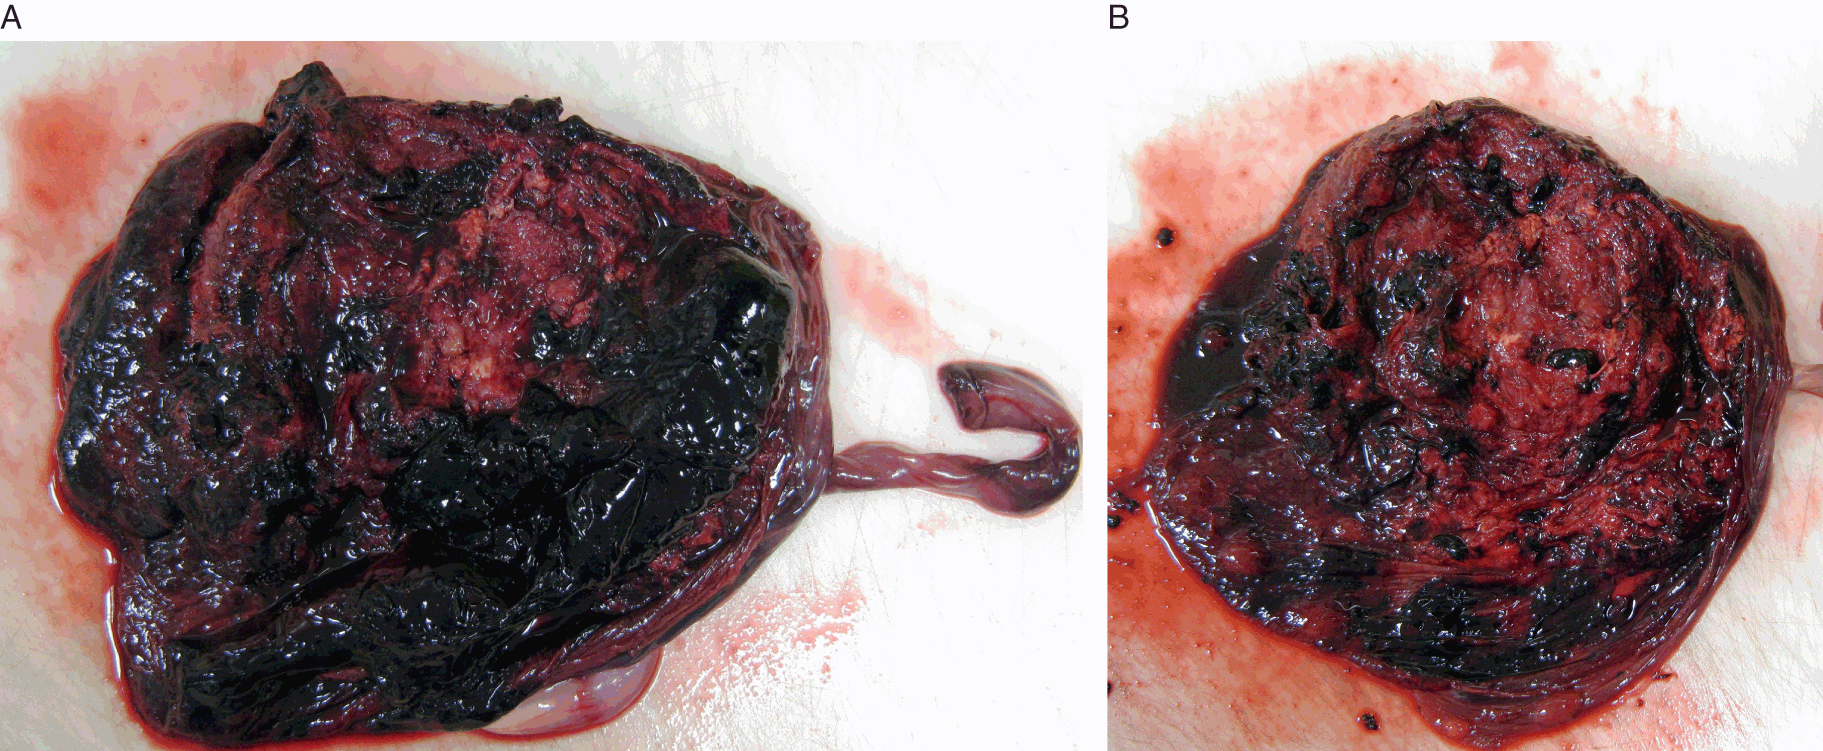 Retromembranous old looking blood clots in the placenta